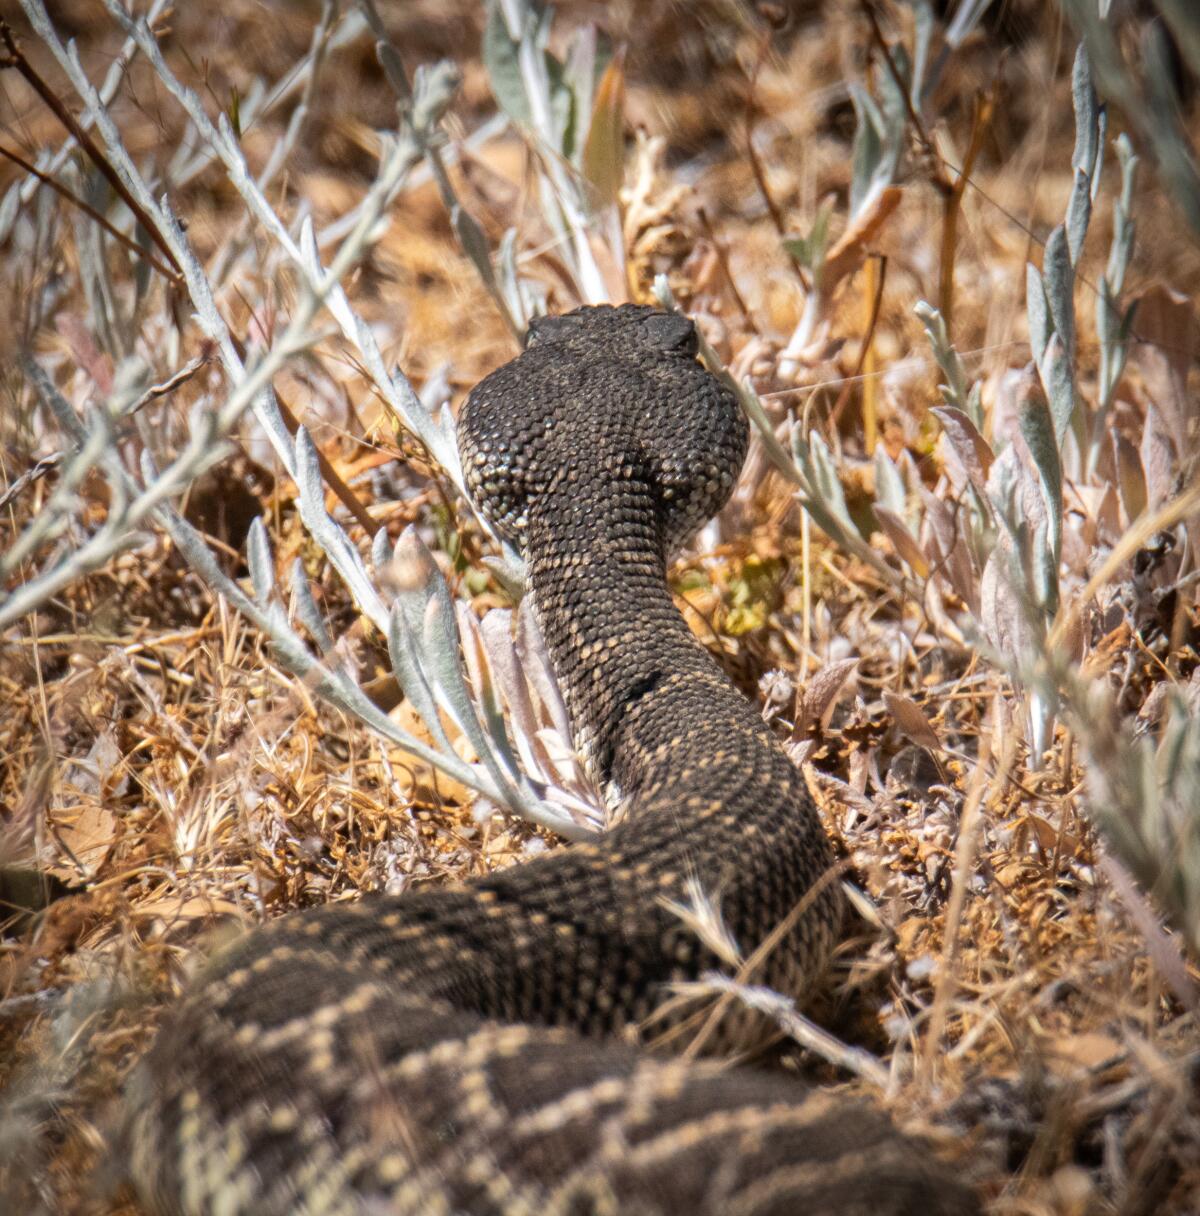 A Western Pacific rattlesnake.